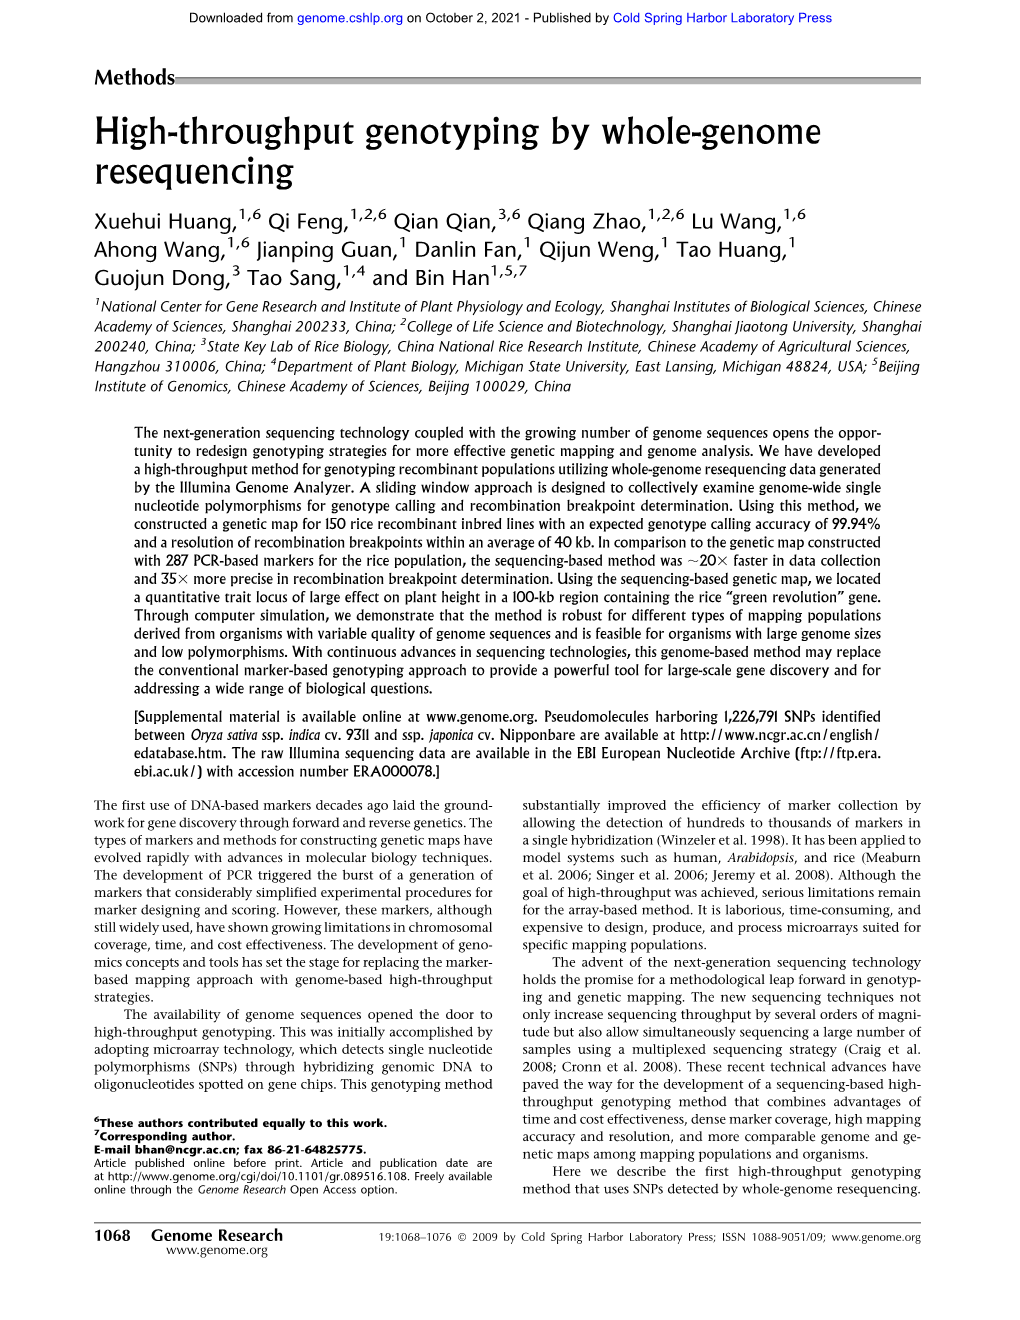 High-Throughput Genotyping by Whole-Genome Resequencing